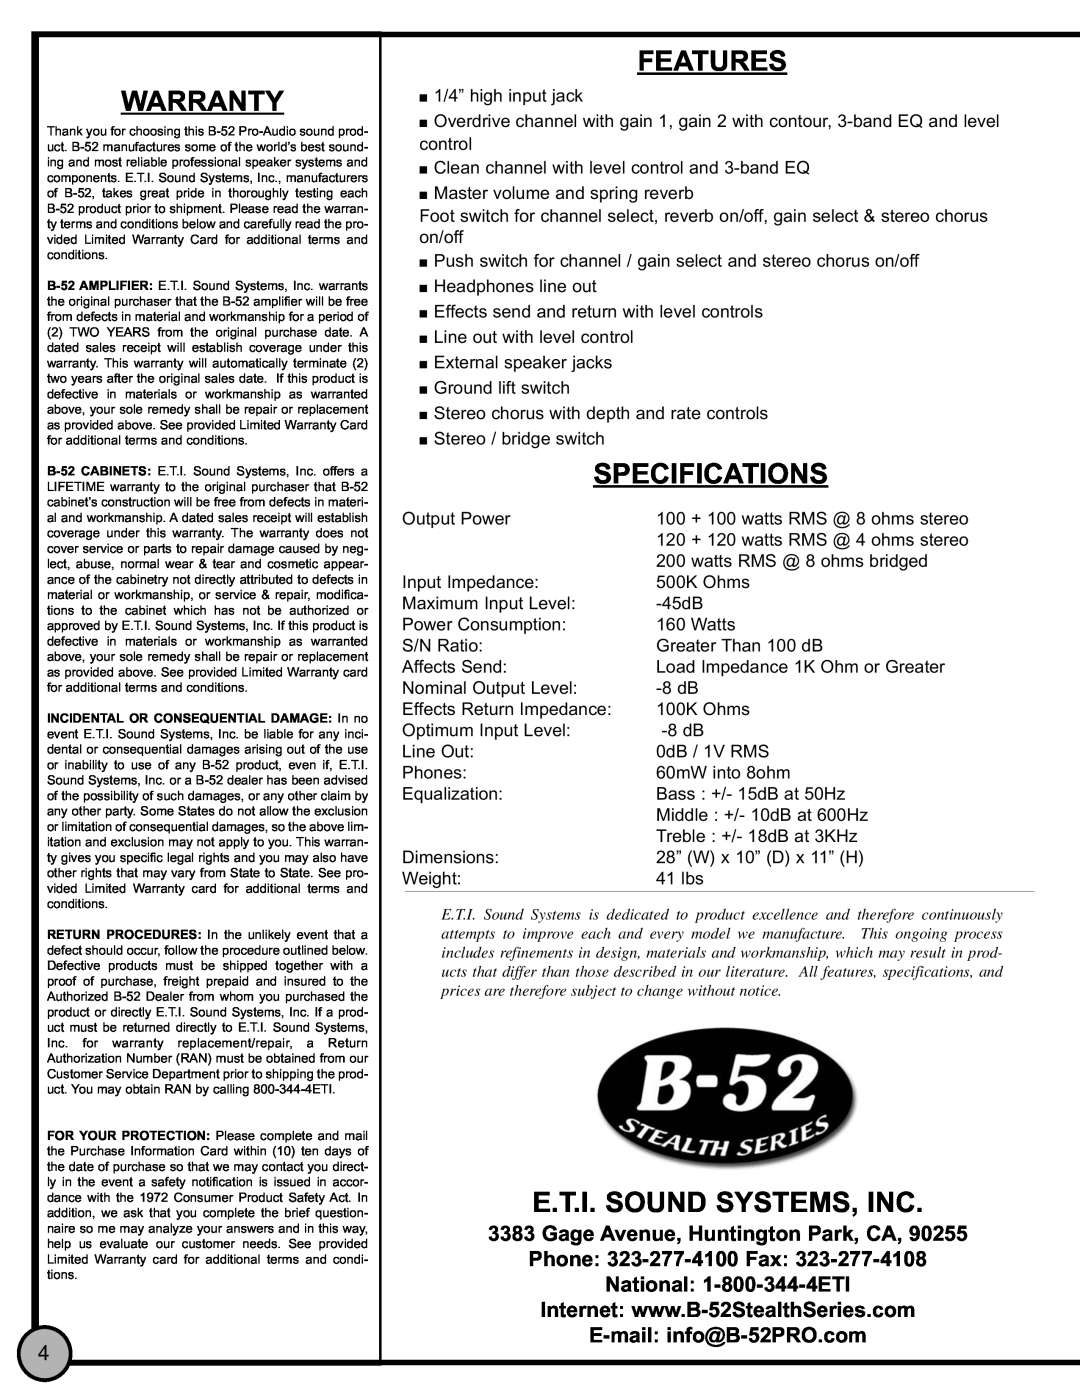 ETI Sound Systems, INC LG-200AS manual Warranty, Features, Specifications, E.T.I. Sound Systems, Inc 